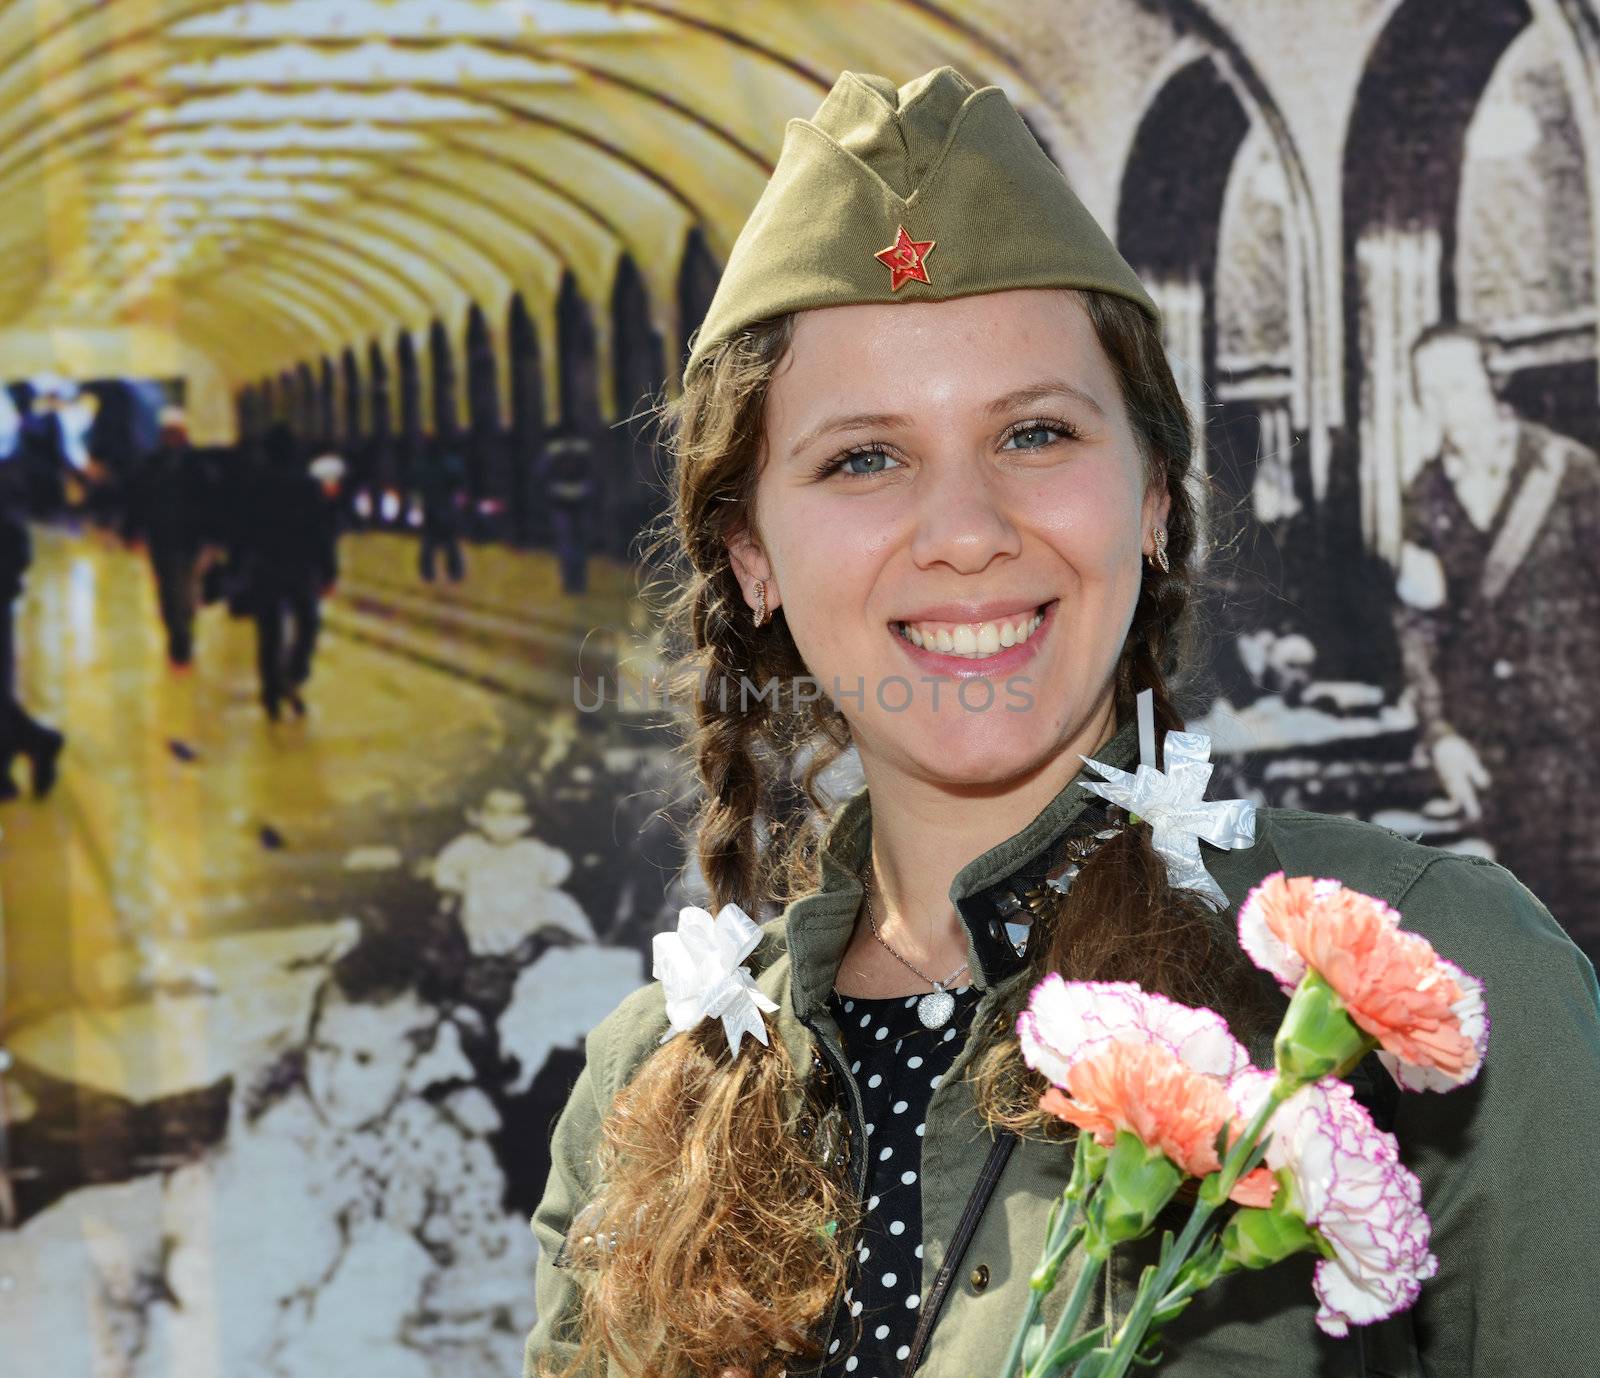  Moscow, Russia - May 9, 2013: Portrait of young girl in uniform decorated bearing bunch of flowers during festivities devoted to 68th anniversary of Victory Day  